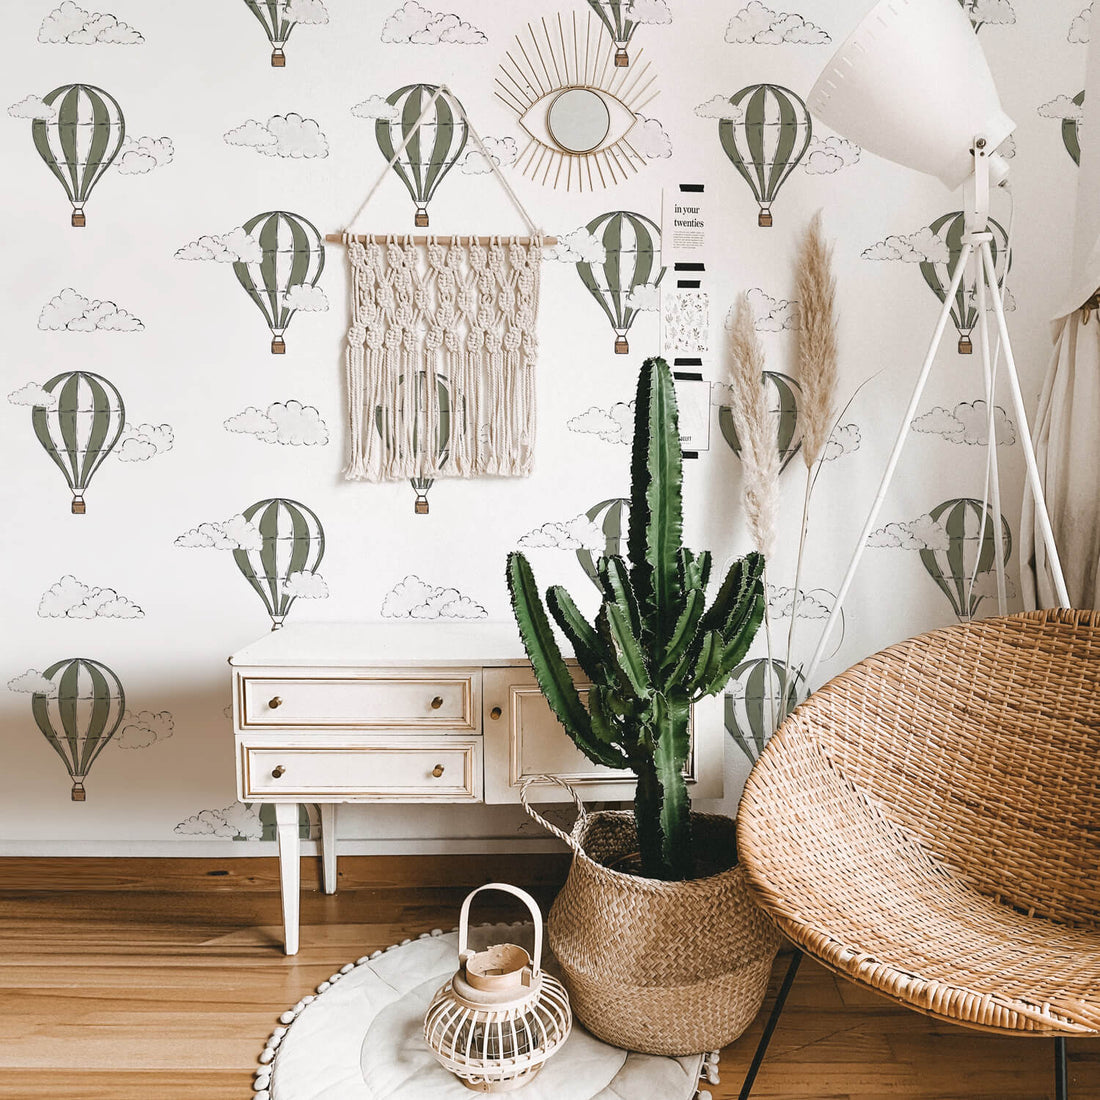 Khaki green watercolor air balloon removable wallpaper in boho interior with cactus and rattan furniture 